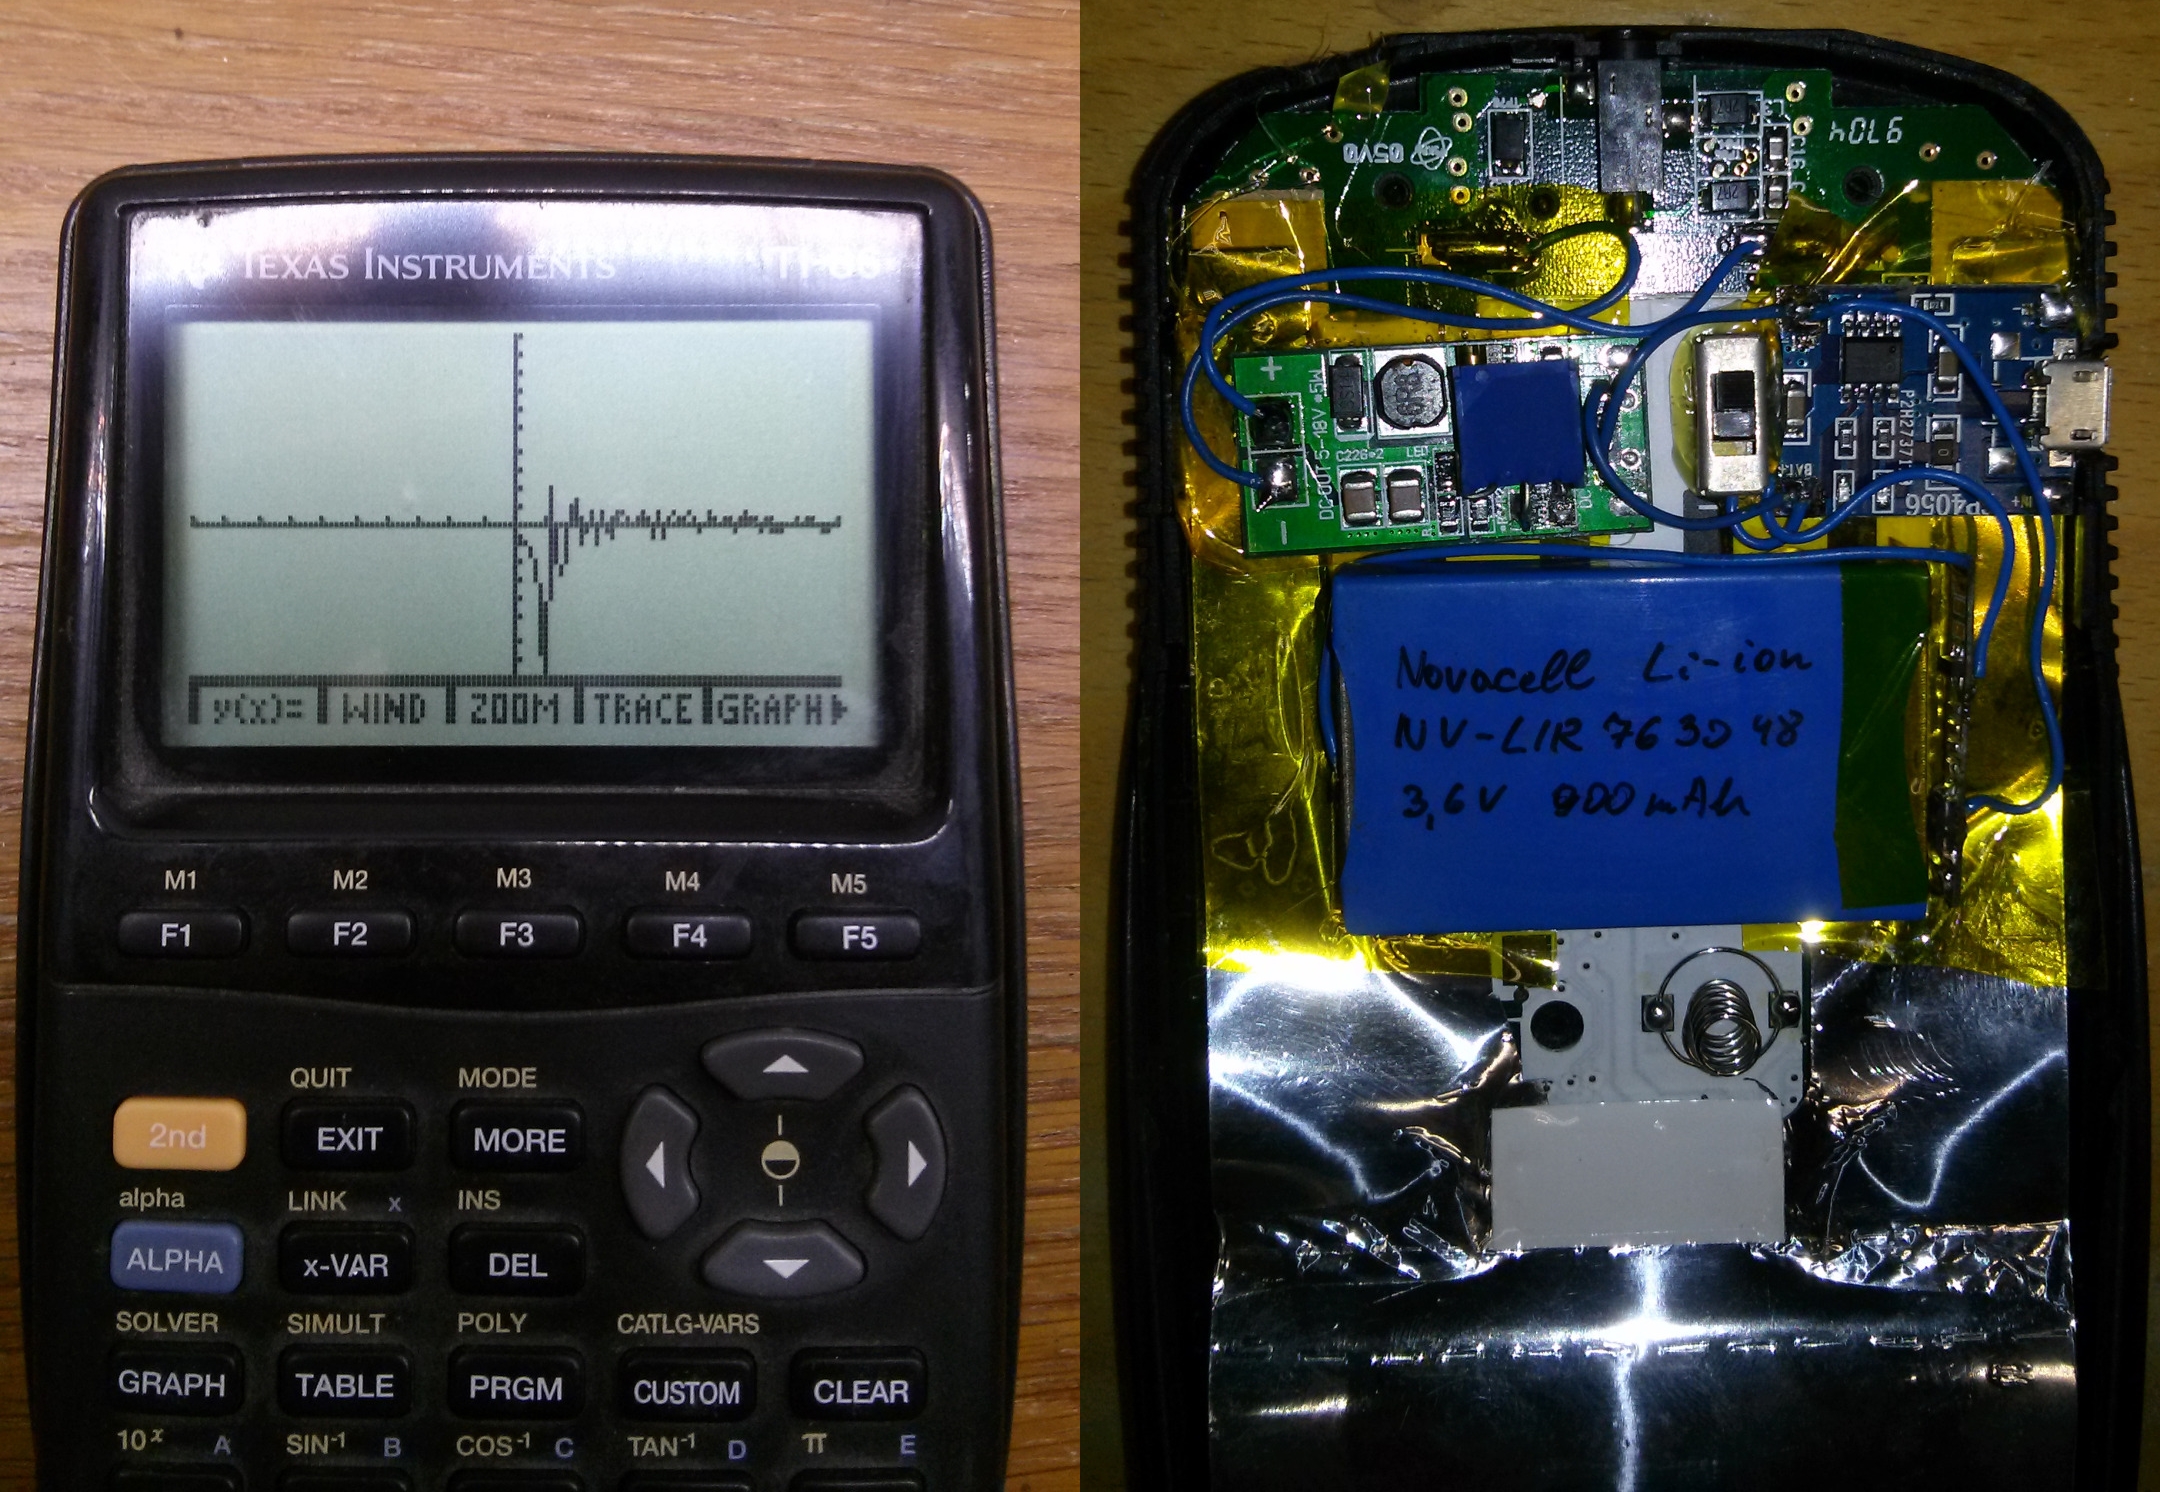 Finally, An Upgrade For The TI-86 | Hackaday